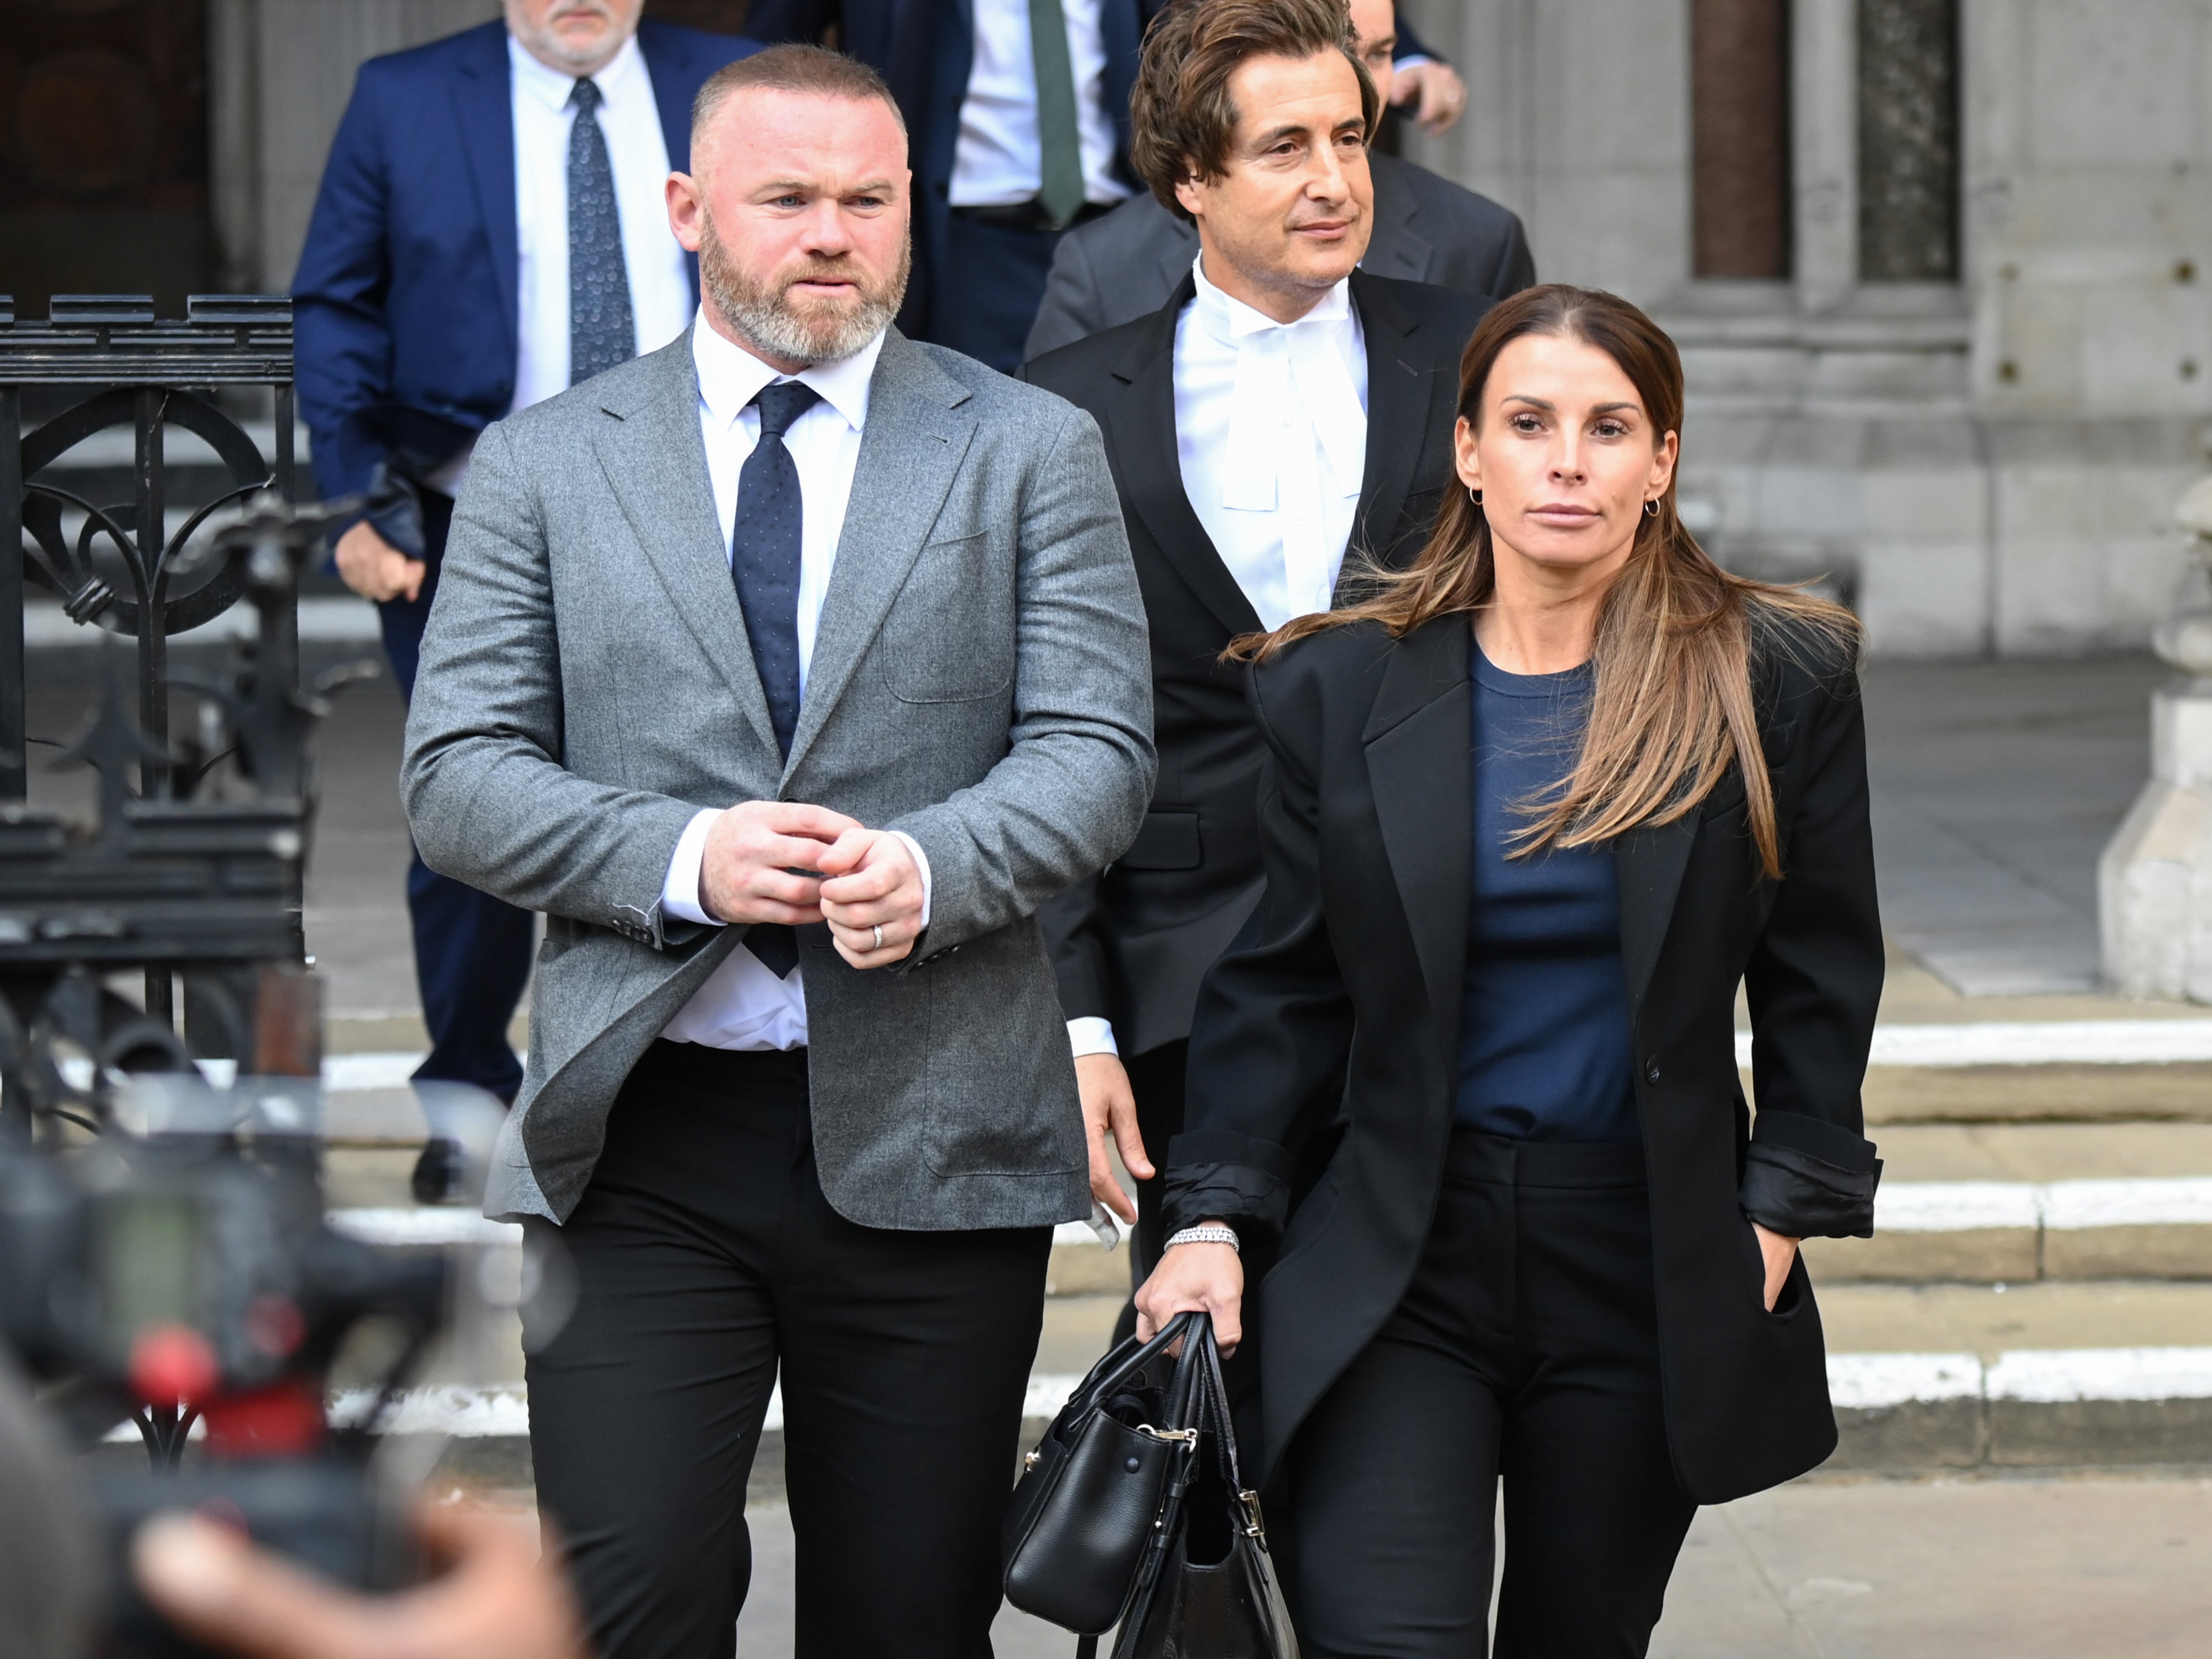 Wayne Rooney and Coleen Rooney depart the Royal Courts of Justice on Tuesday